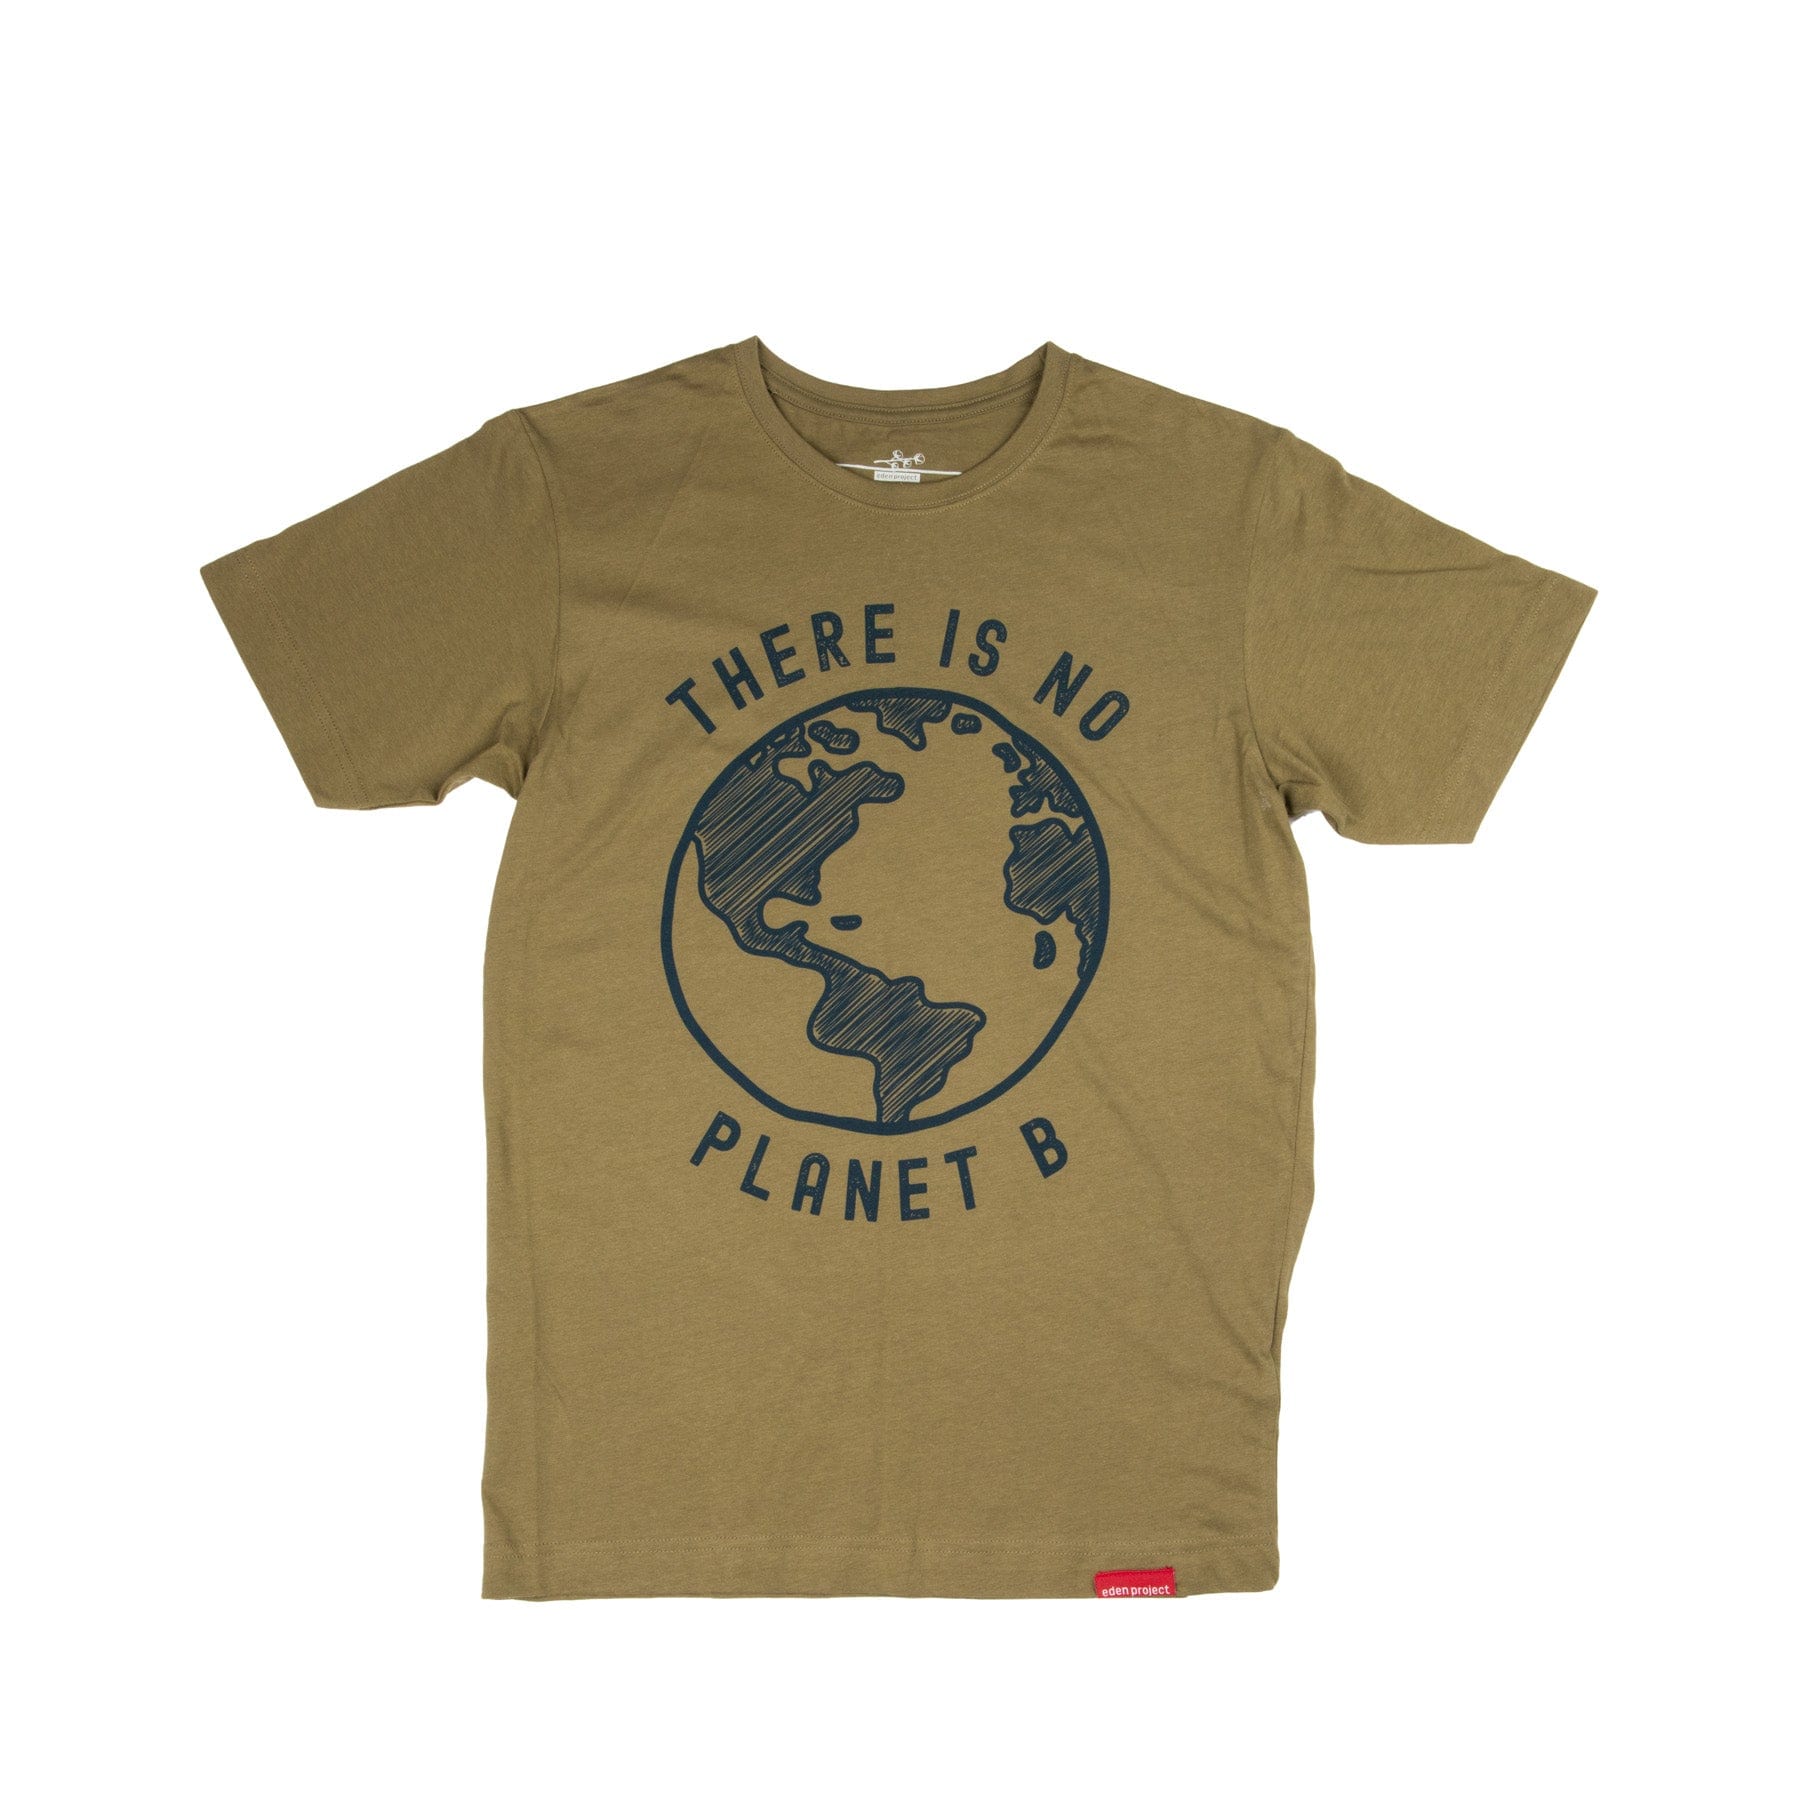 Olive green t-shirt with environmental slogan "There is no Planet B" encircling a graphic of Earth, eco-friendly apparel, sustainable fashion concept.